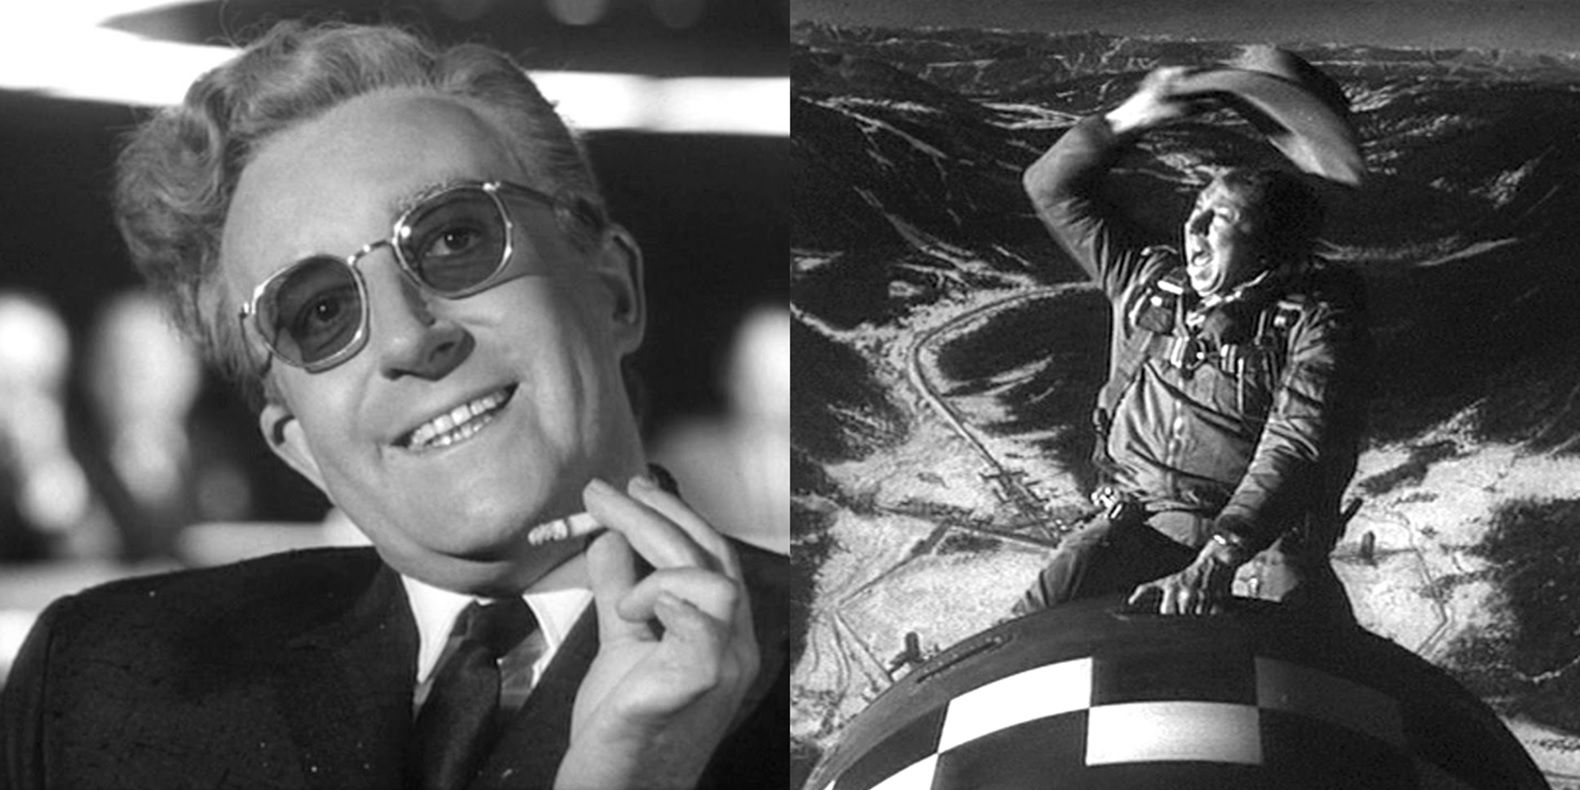 Split image of Peter Sellers smoking a cigarette and Slim Pickens riding a bomb in Dr. Strangelove